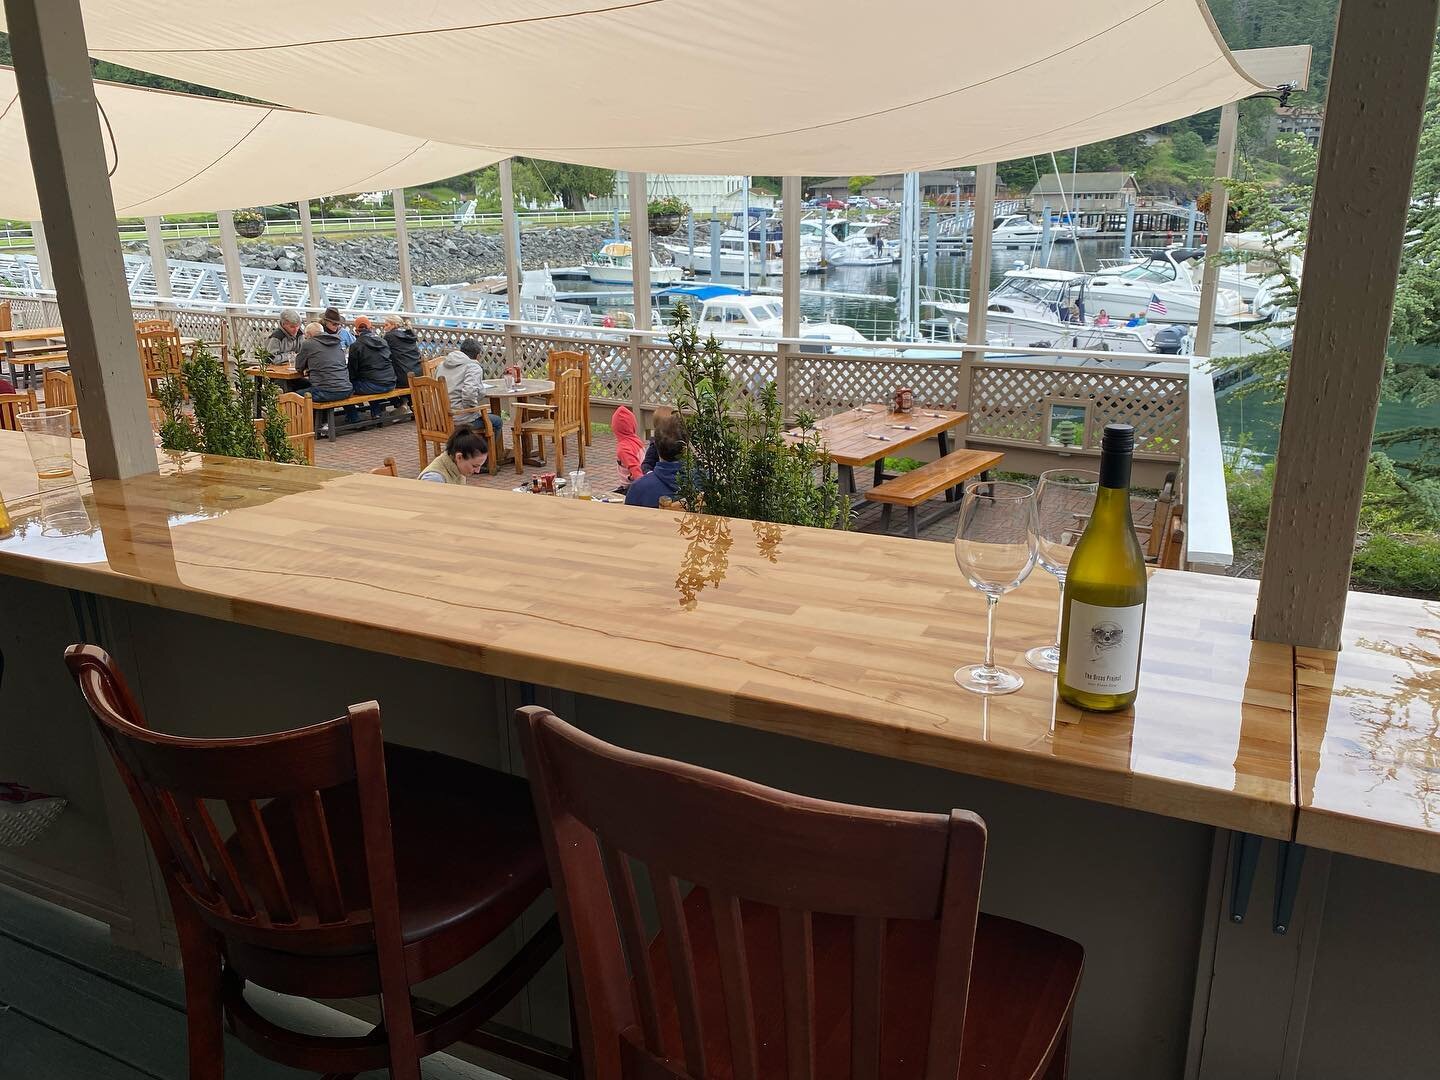 The Cascade Bay Grill is open for the season!  Come enjoy our new deck bar overlooking the marina.  Grill Hours are Noon - 8 pm Friday-Monday (bar open until 9 pm) and Store Hours are 8 am - 8 pm Thursday - Monday.